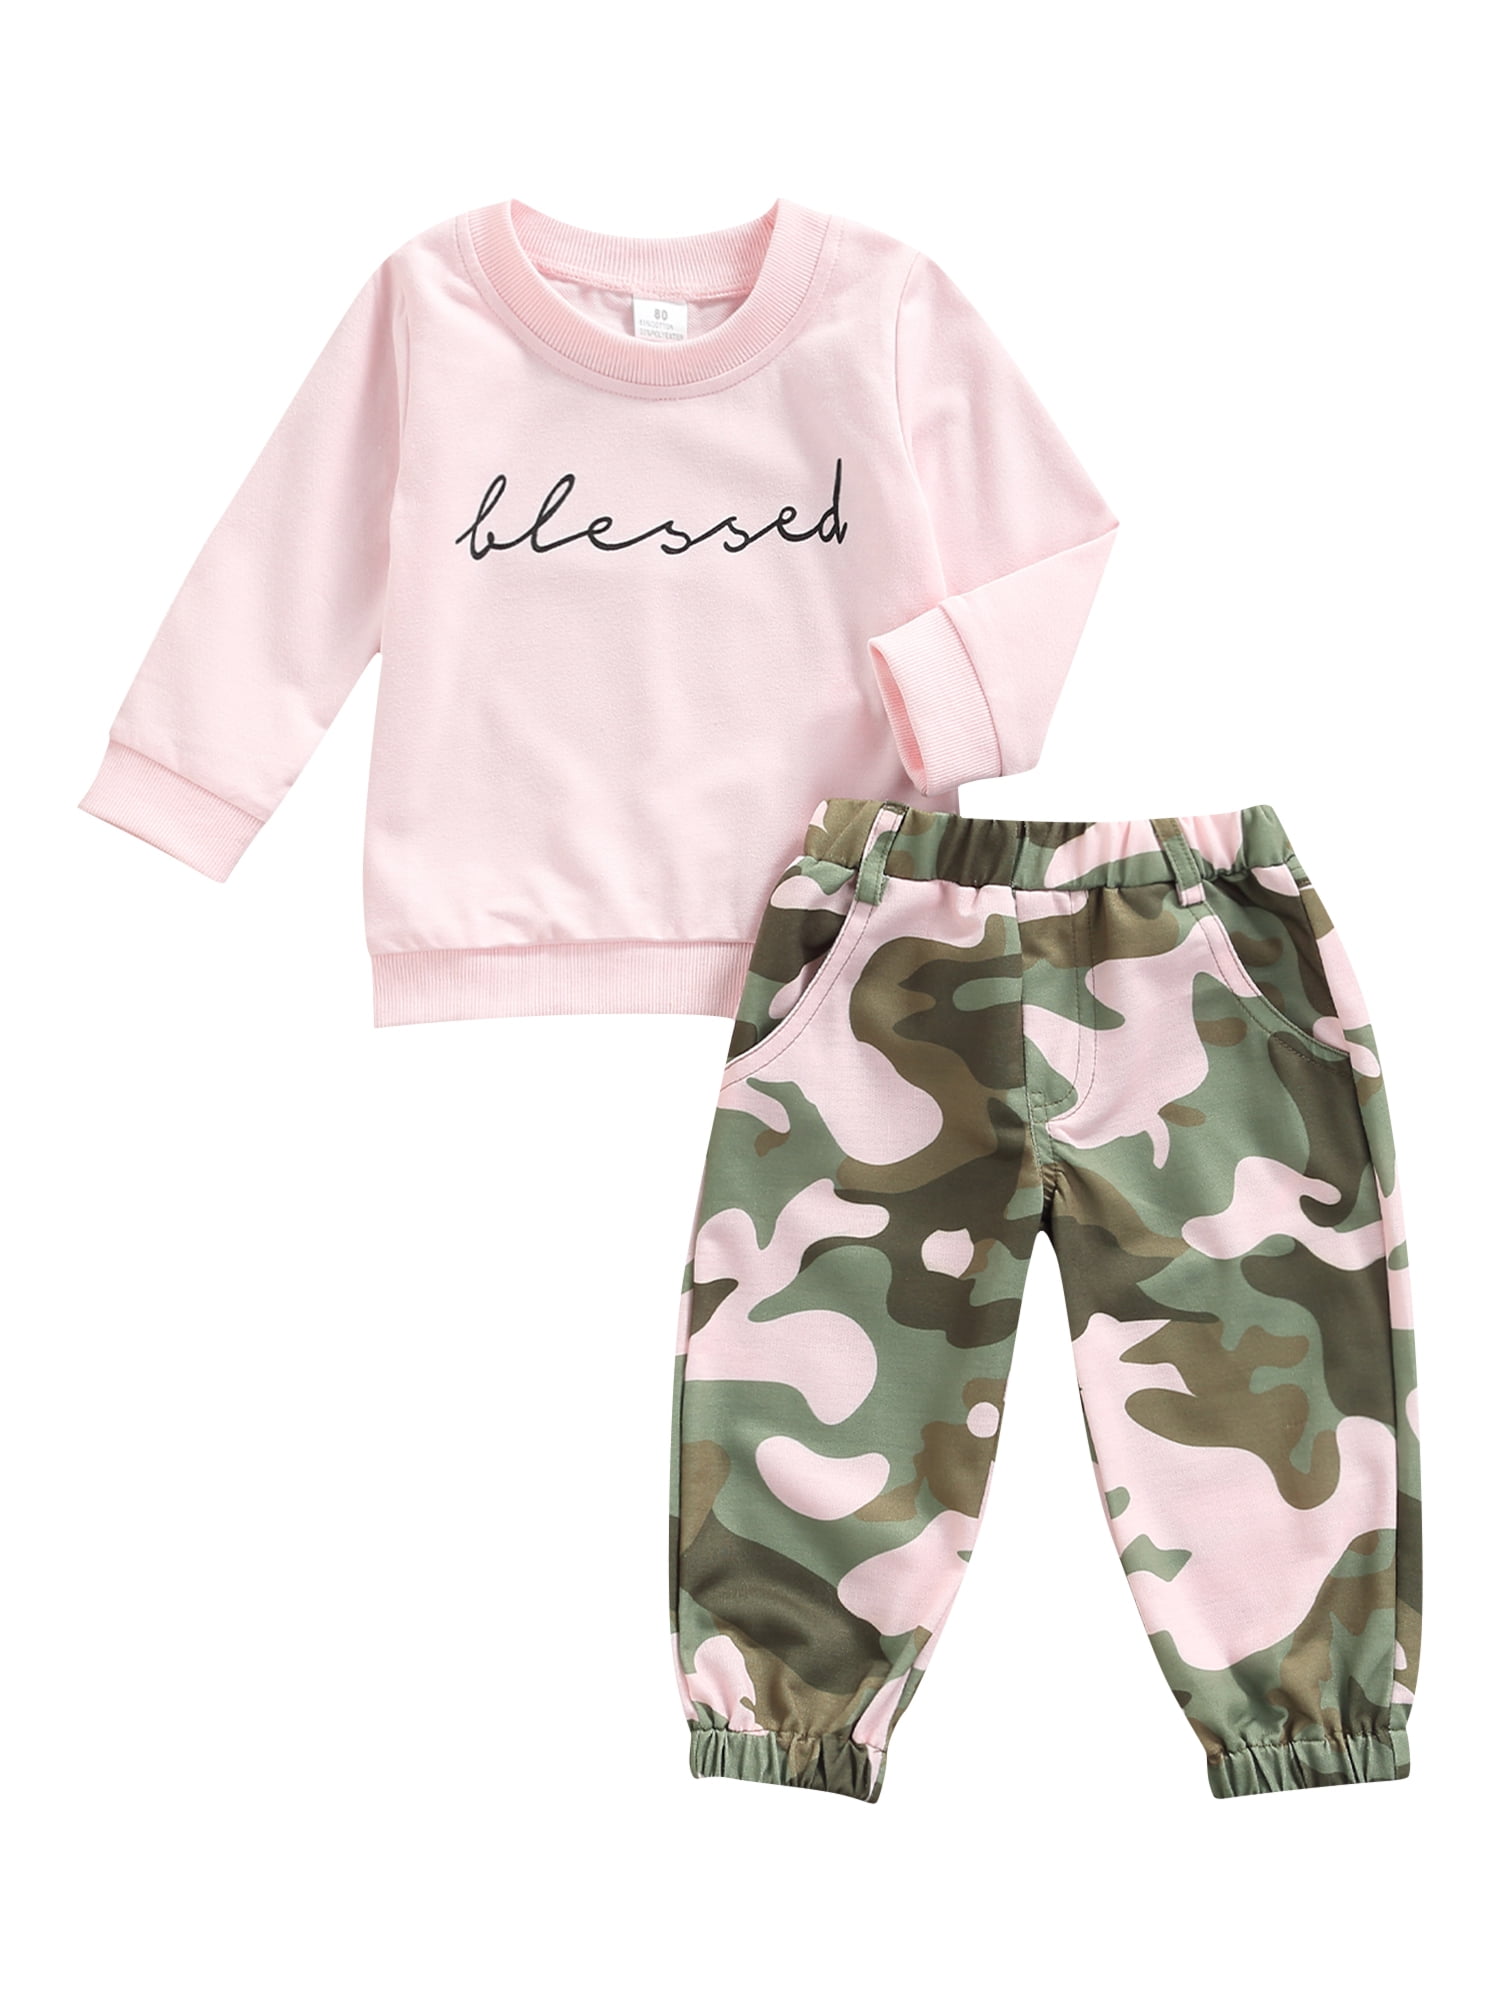 Toddler Kids Baby Girl Outfits Pink Long Sleeve Camouflage Clothes Set Tracksuit 